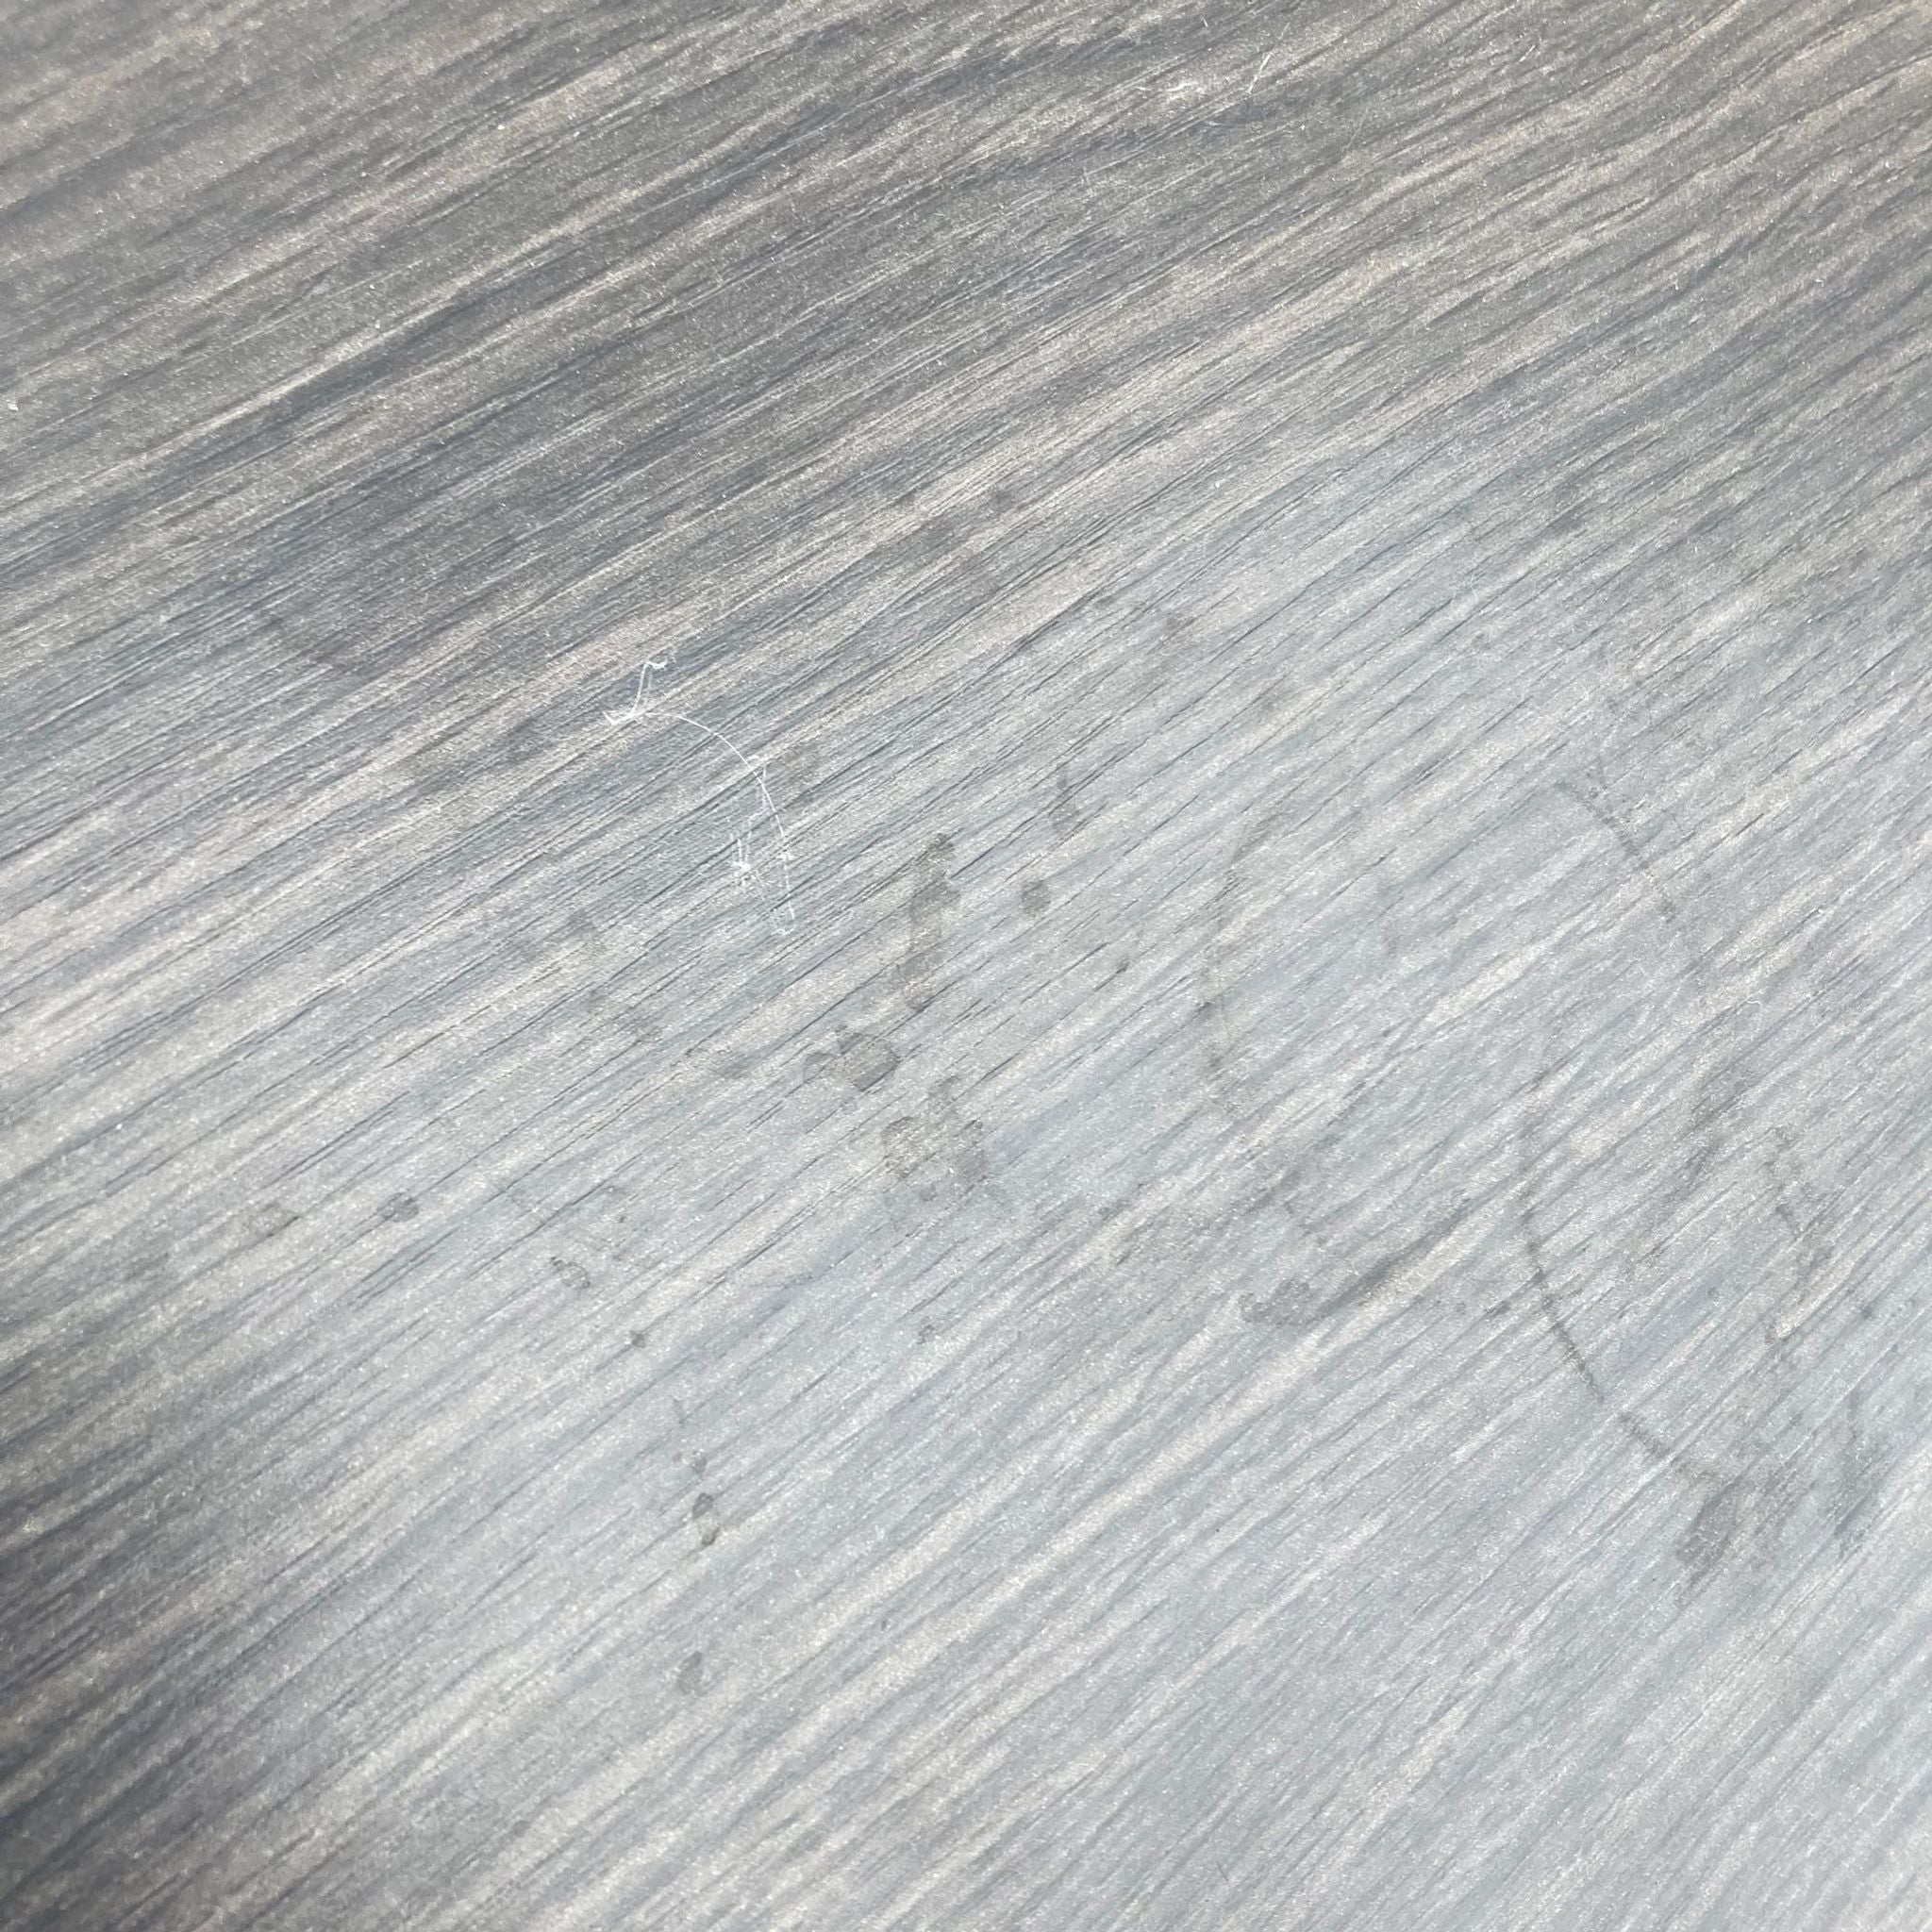 3. Close-up of the wood grain texture on the surface of a Reperch side table, highlighting the quality and finish of the material.